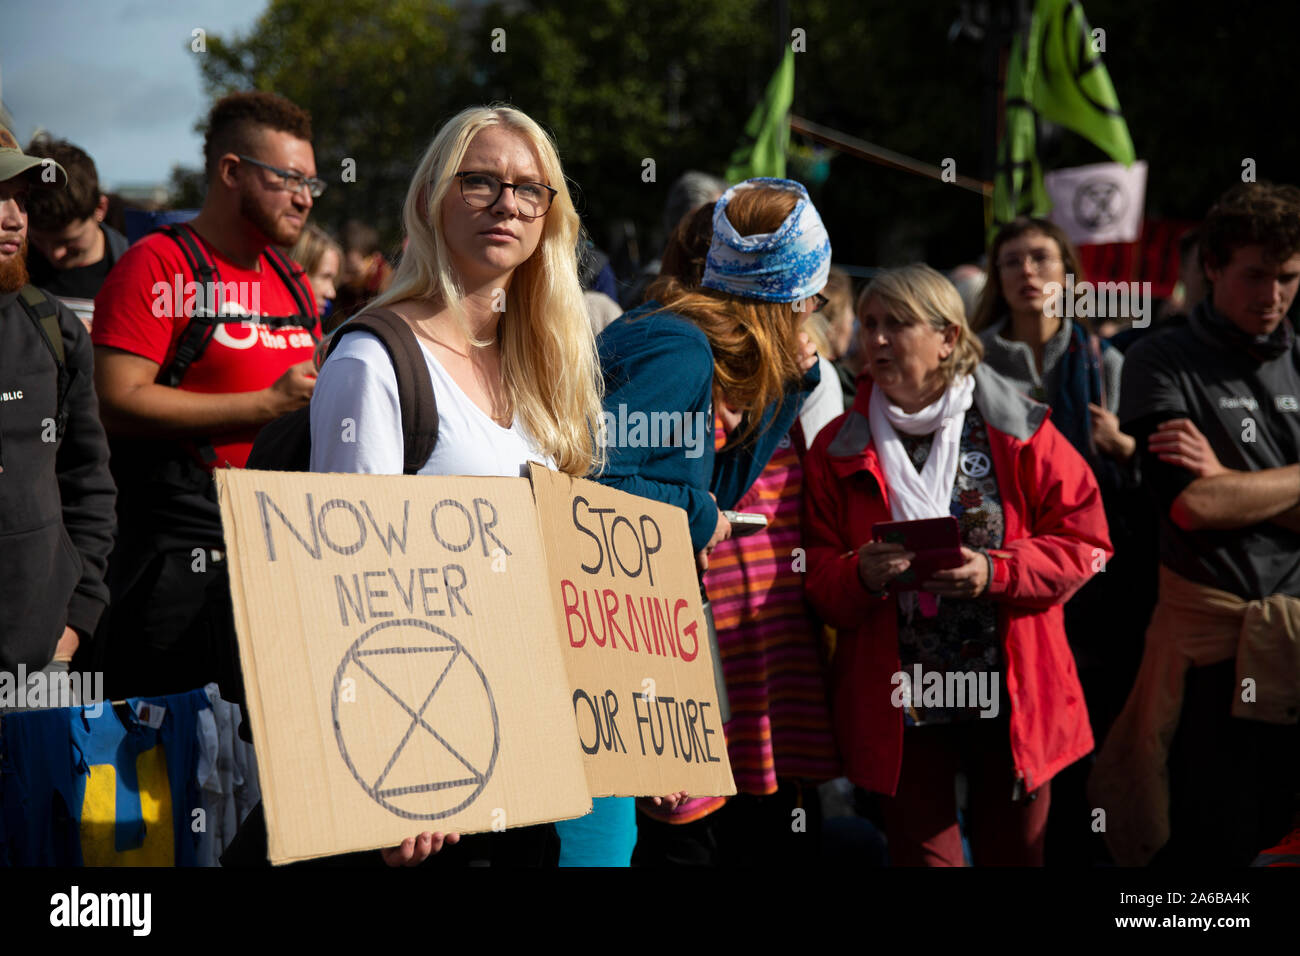 London, 10th October 2019, Extinction Rebellion demonstration and occupation of streets leading to Trafalgar Square. Stock Photo